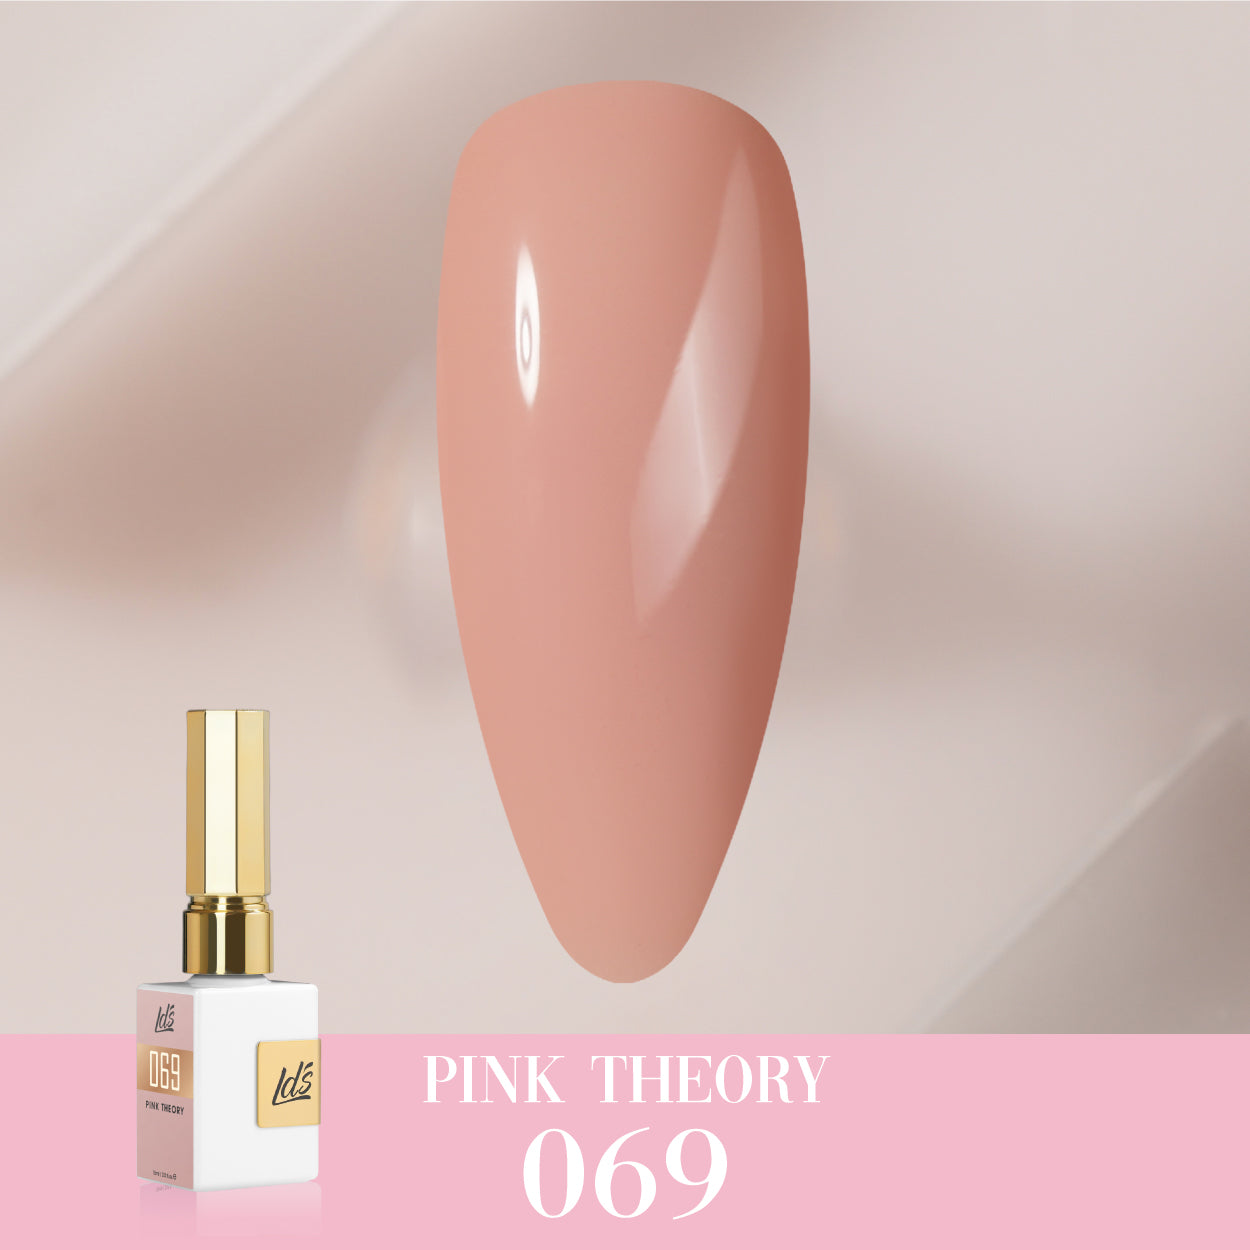 LDS Color Craze Collection - 069 Pink Theory - Gel Polish 0.5oz